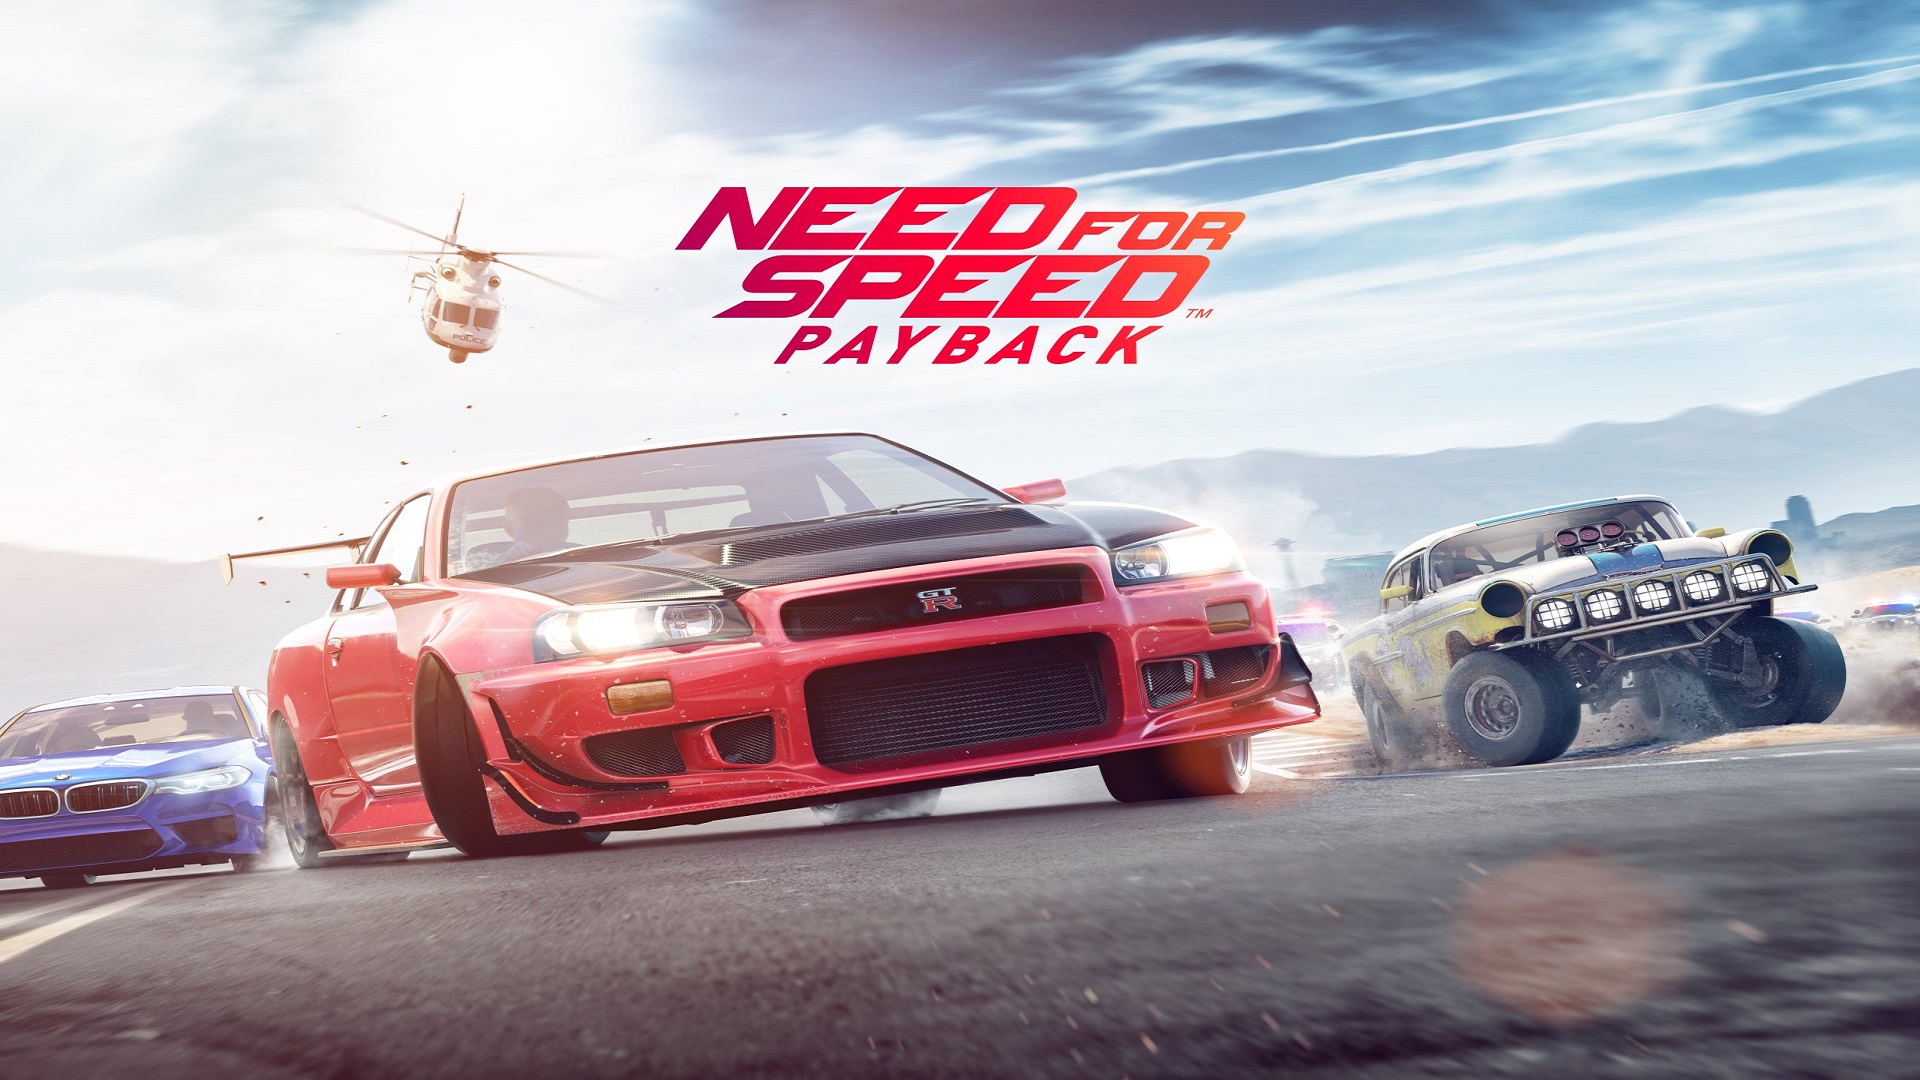 need for speed payback reach multiplier of 2 in free roam